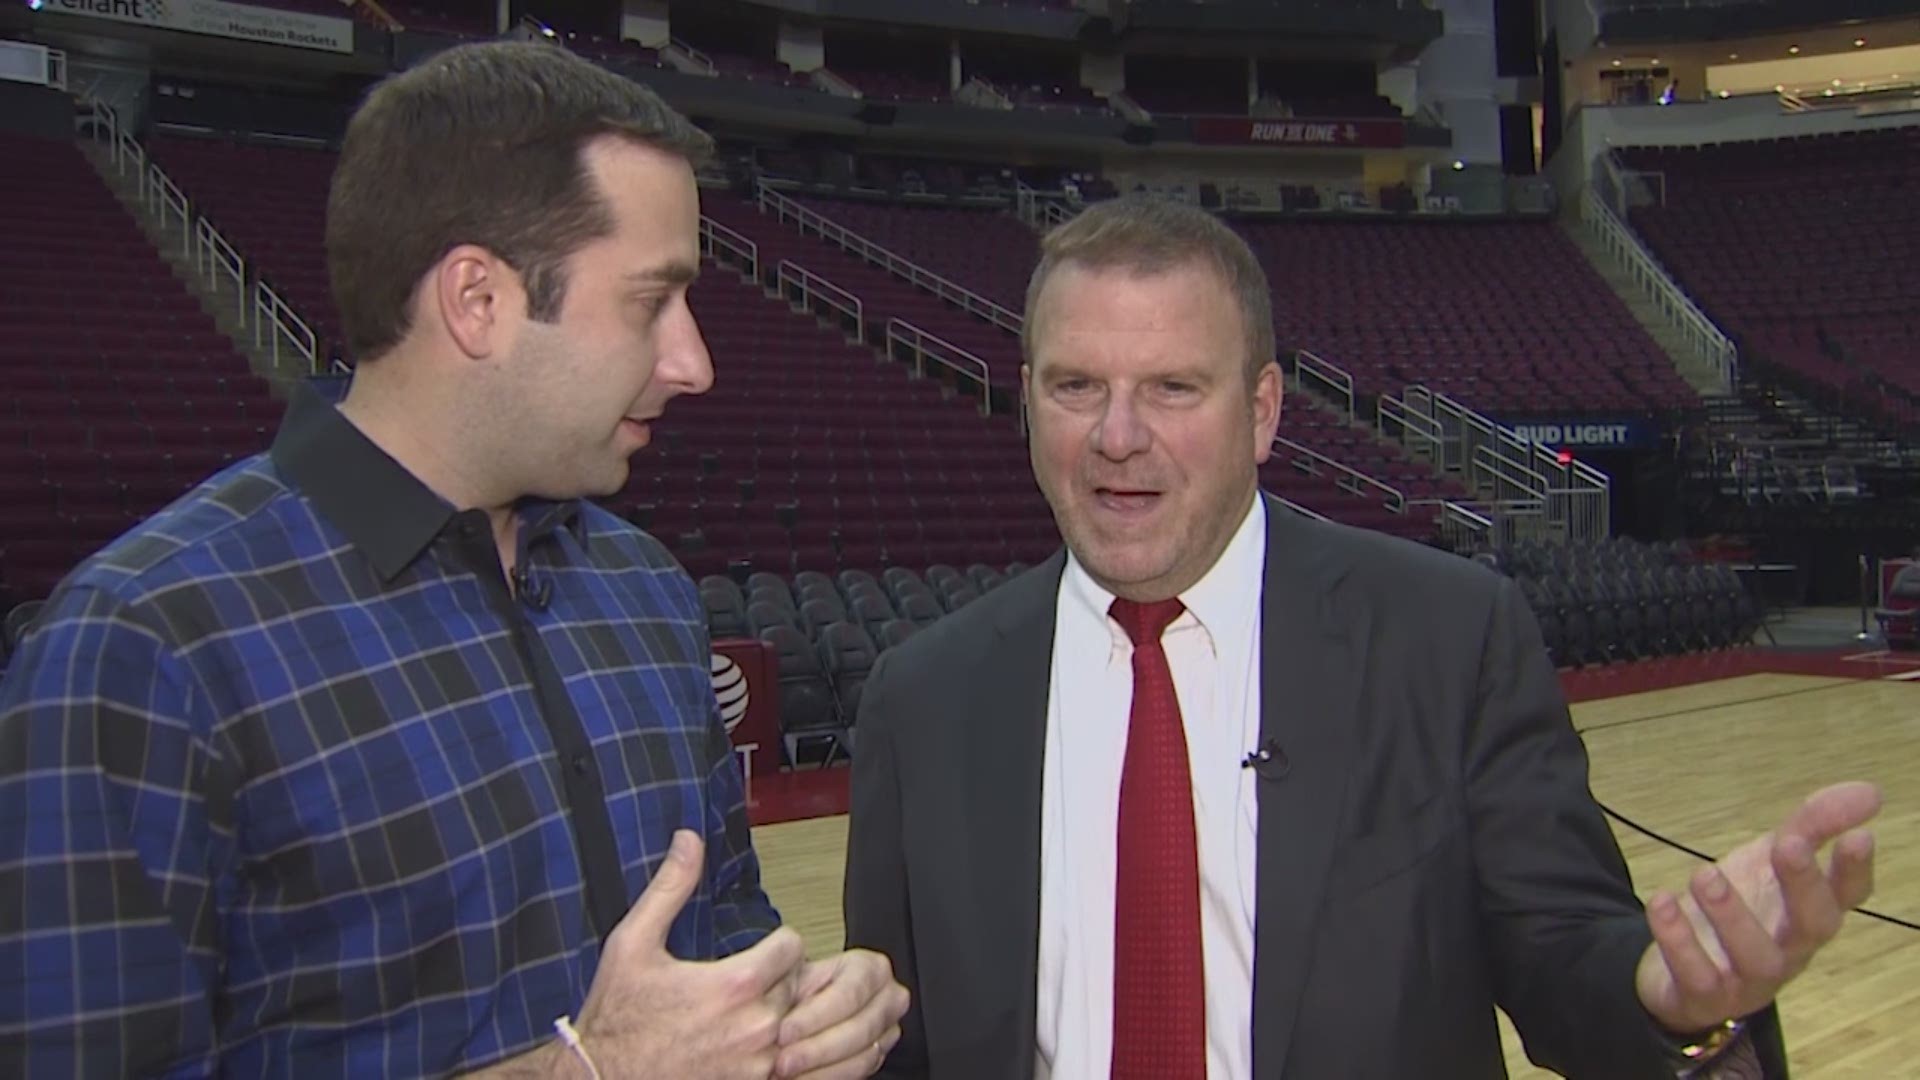 KHOU 11 Sports reporter Daniel Gotera goes one-on-one with Tilman Fertitta, the new owner of the Houston Rockets.